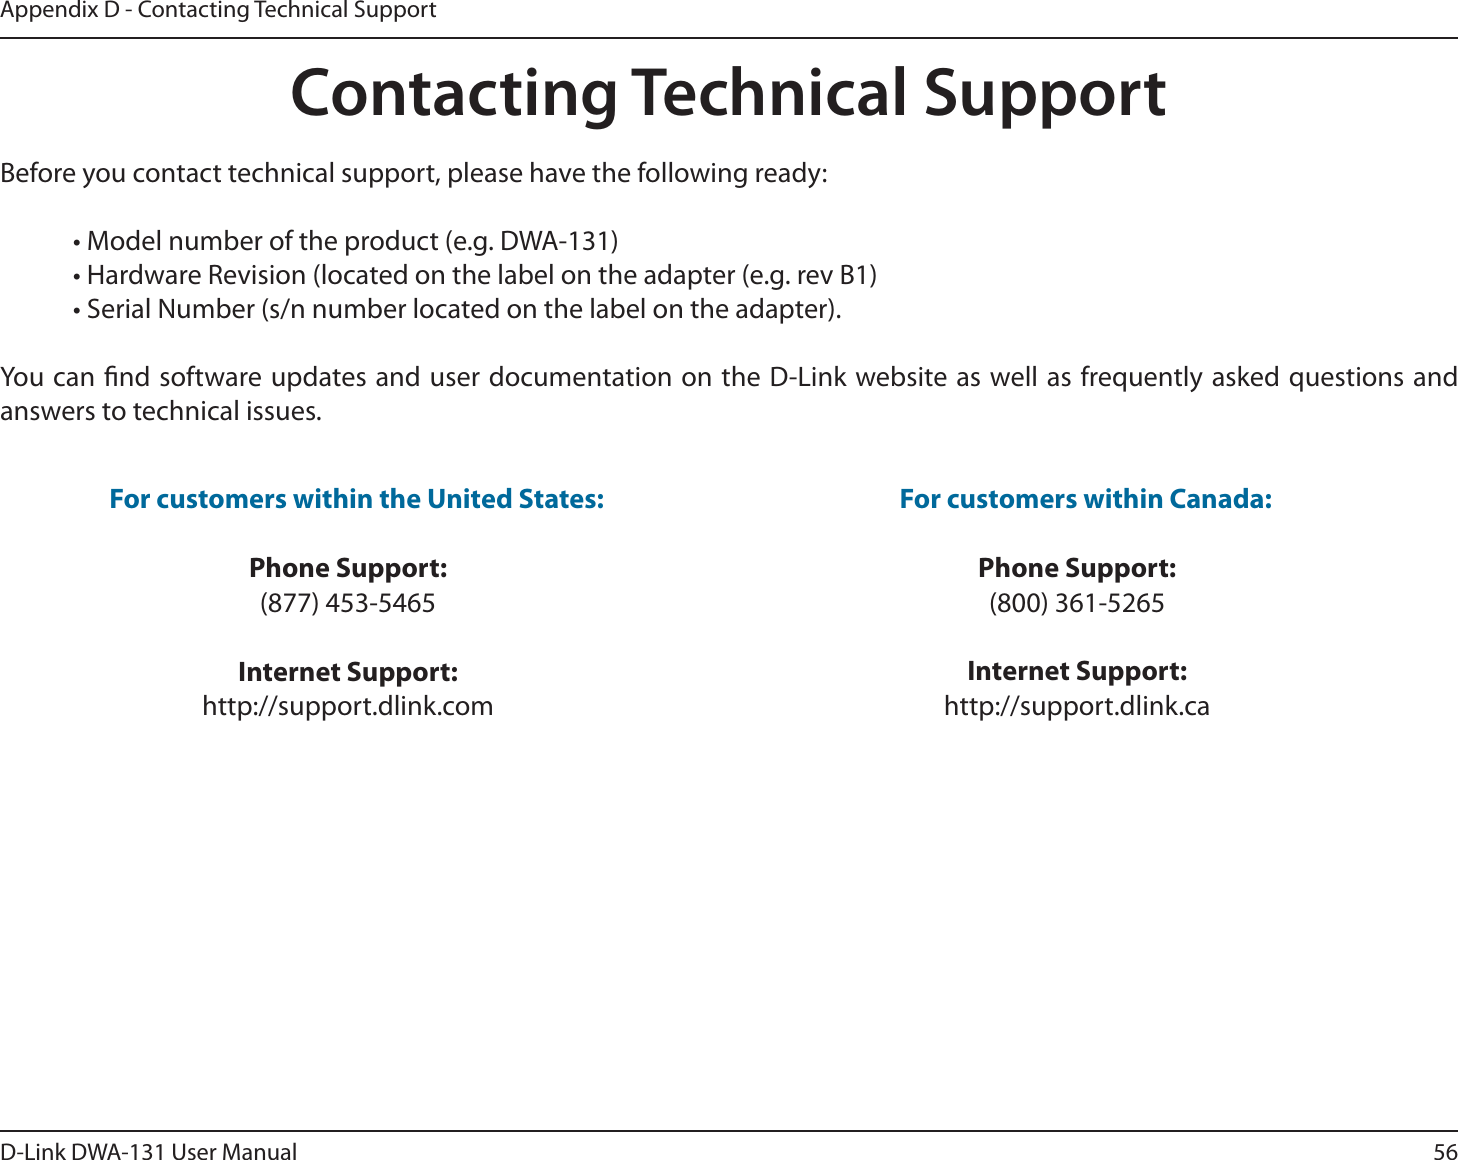 56D-Link DWA-131 User ManualAppendix D - Contacting Technical SupportContacting Technical SupportBefore you contact technical support, please have the following ready:  • Model number of the product (e.g. DWA-131)  • Hardware Revision (located on the label on the adapter (e.g. rev B1)  • Serial Number (s/n number located on the label on the adapter). You can nd software updates and user documentation on the D-Link website as well as frequently asked questions and answers to technical issues.For customers within the United States: Phone Support:(877) 453-5465Internet Support:http://support.dlink.com For customers within Canada: Phone Support:(800) 361-5265Internet Support:http://support.dlink.ca 